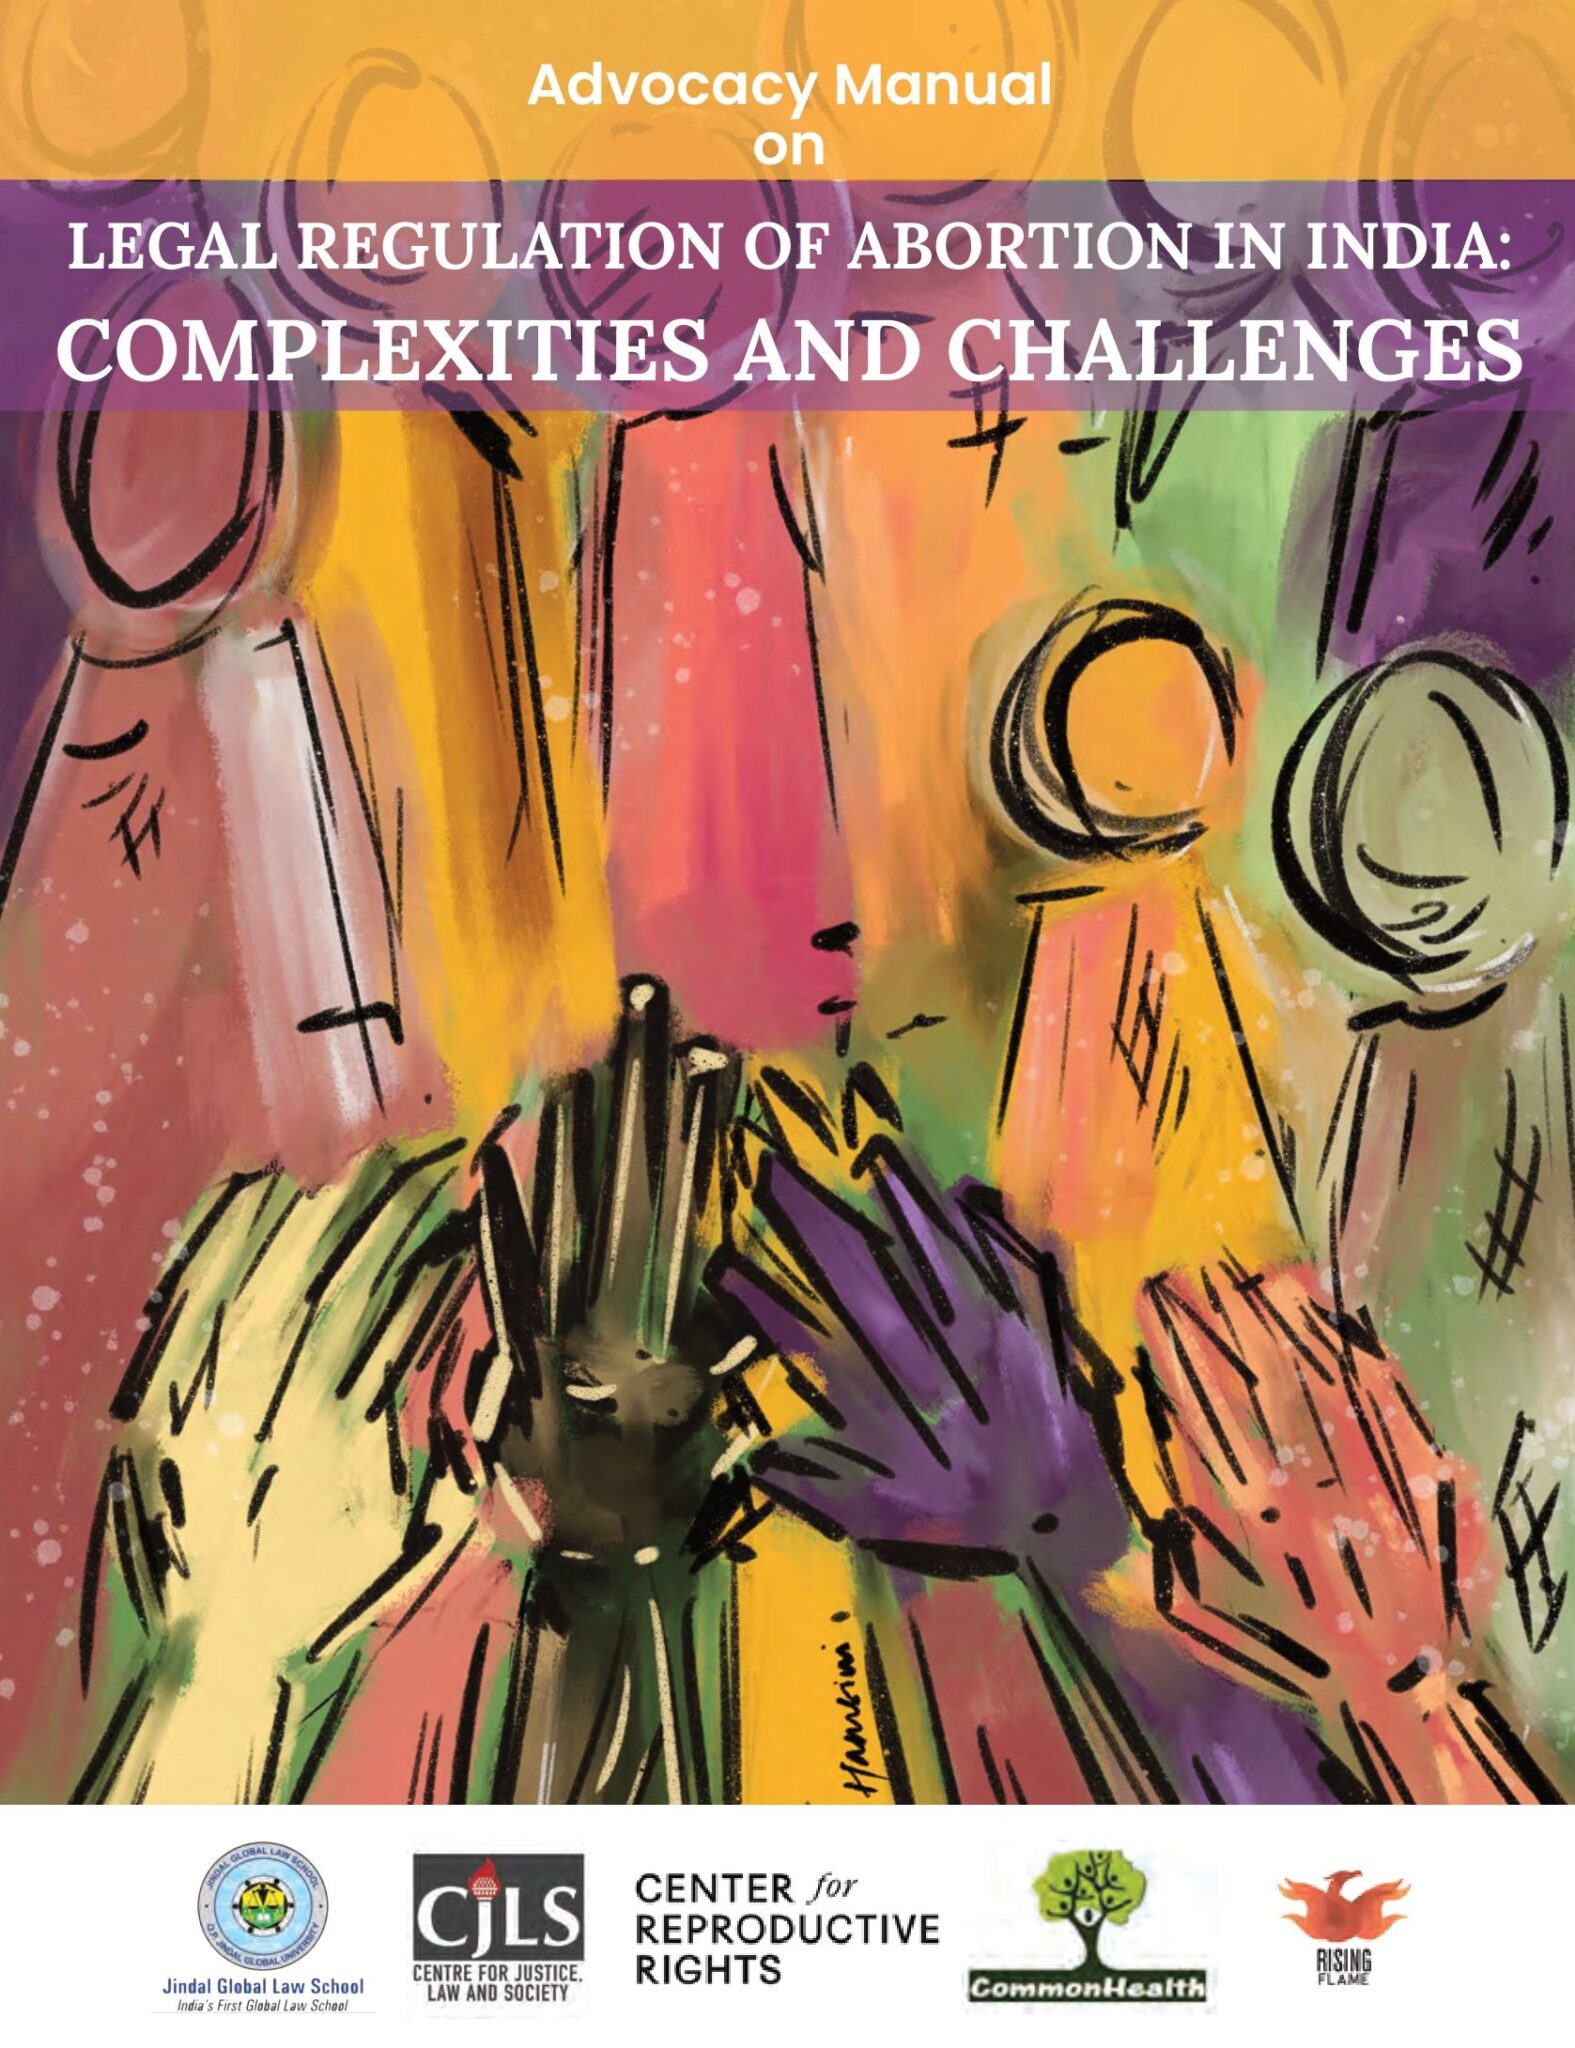 Advocacy Manual on Legal Regulation of Abortion in India: Complexities and Challenges